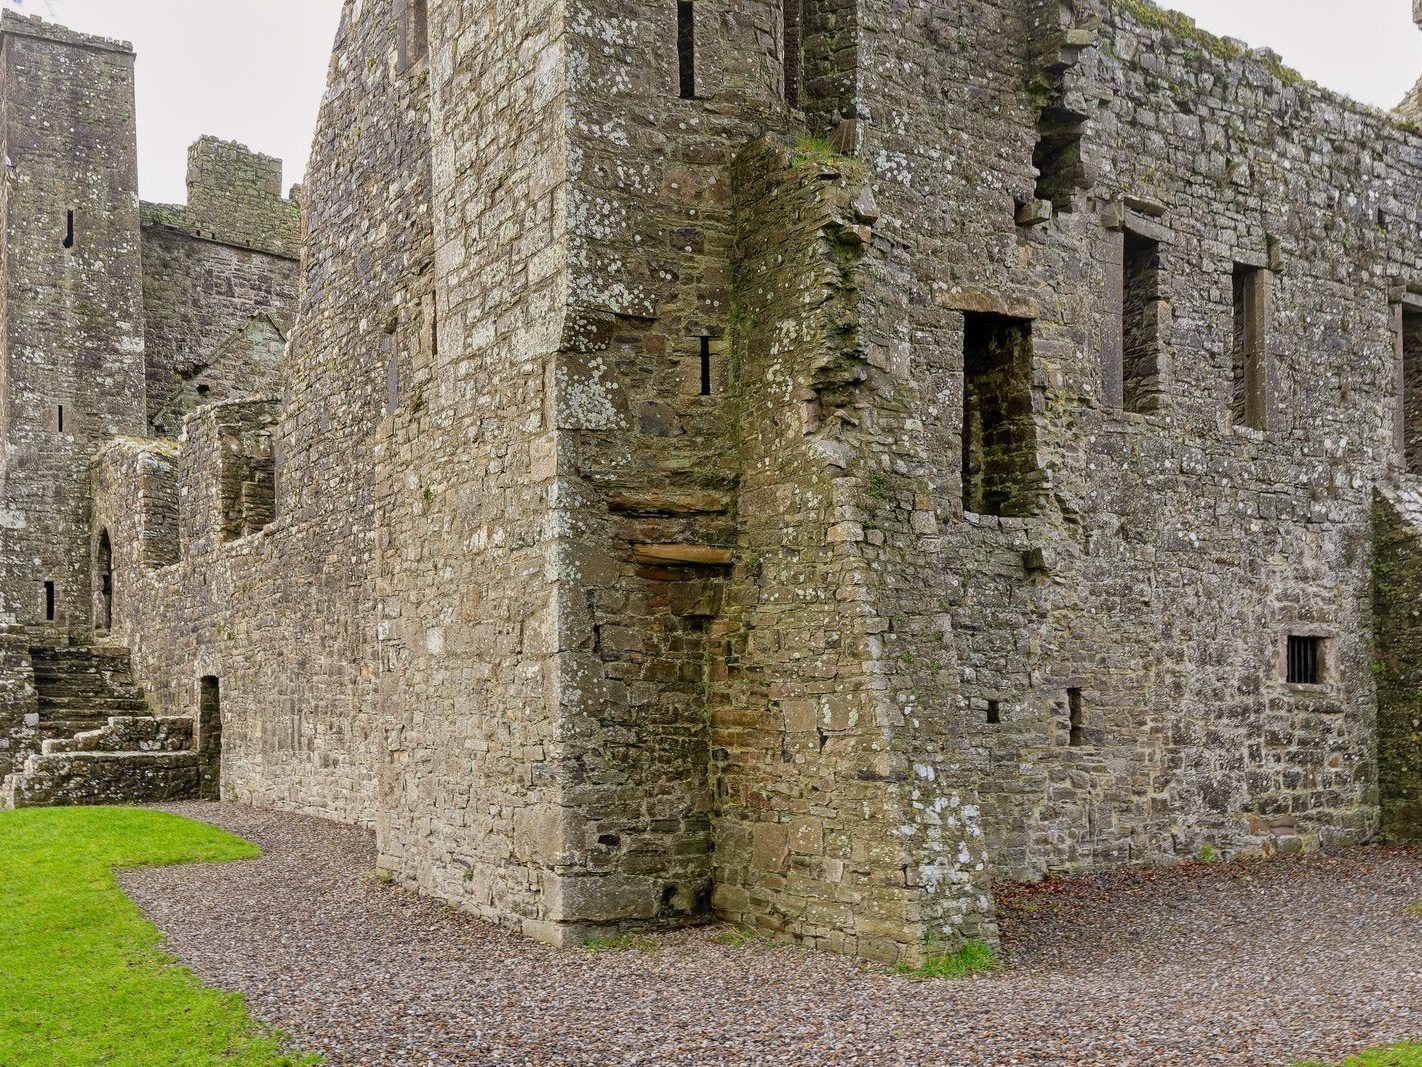 BECTIVE ABBEY WHICH I VISITED LAST CHRISTMAS [THERE WERE NO OTHER VISITORS AS IT WAS A VERY WET DAY]--225216-1